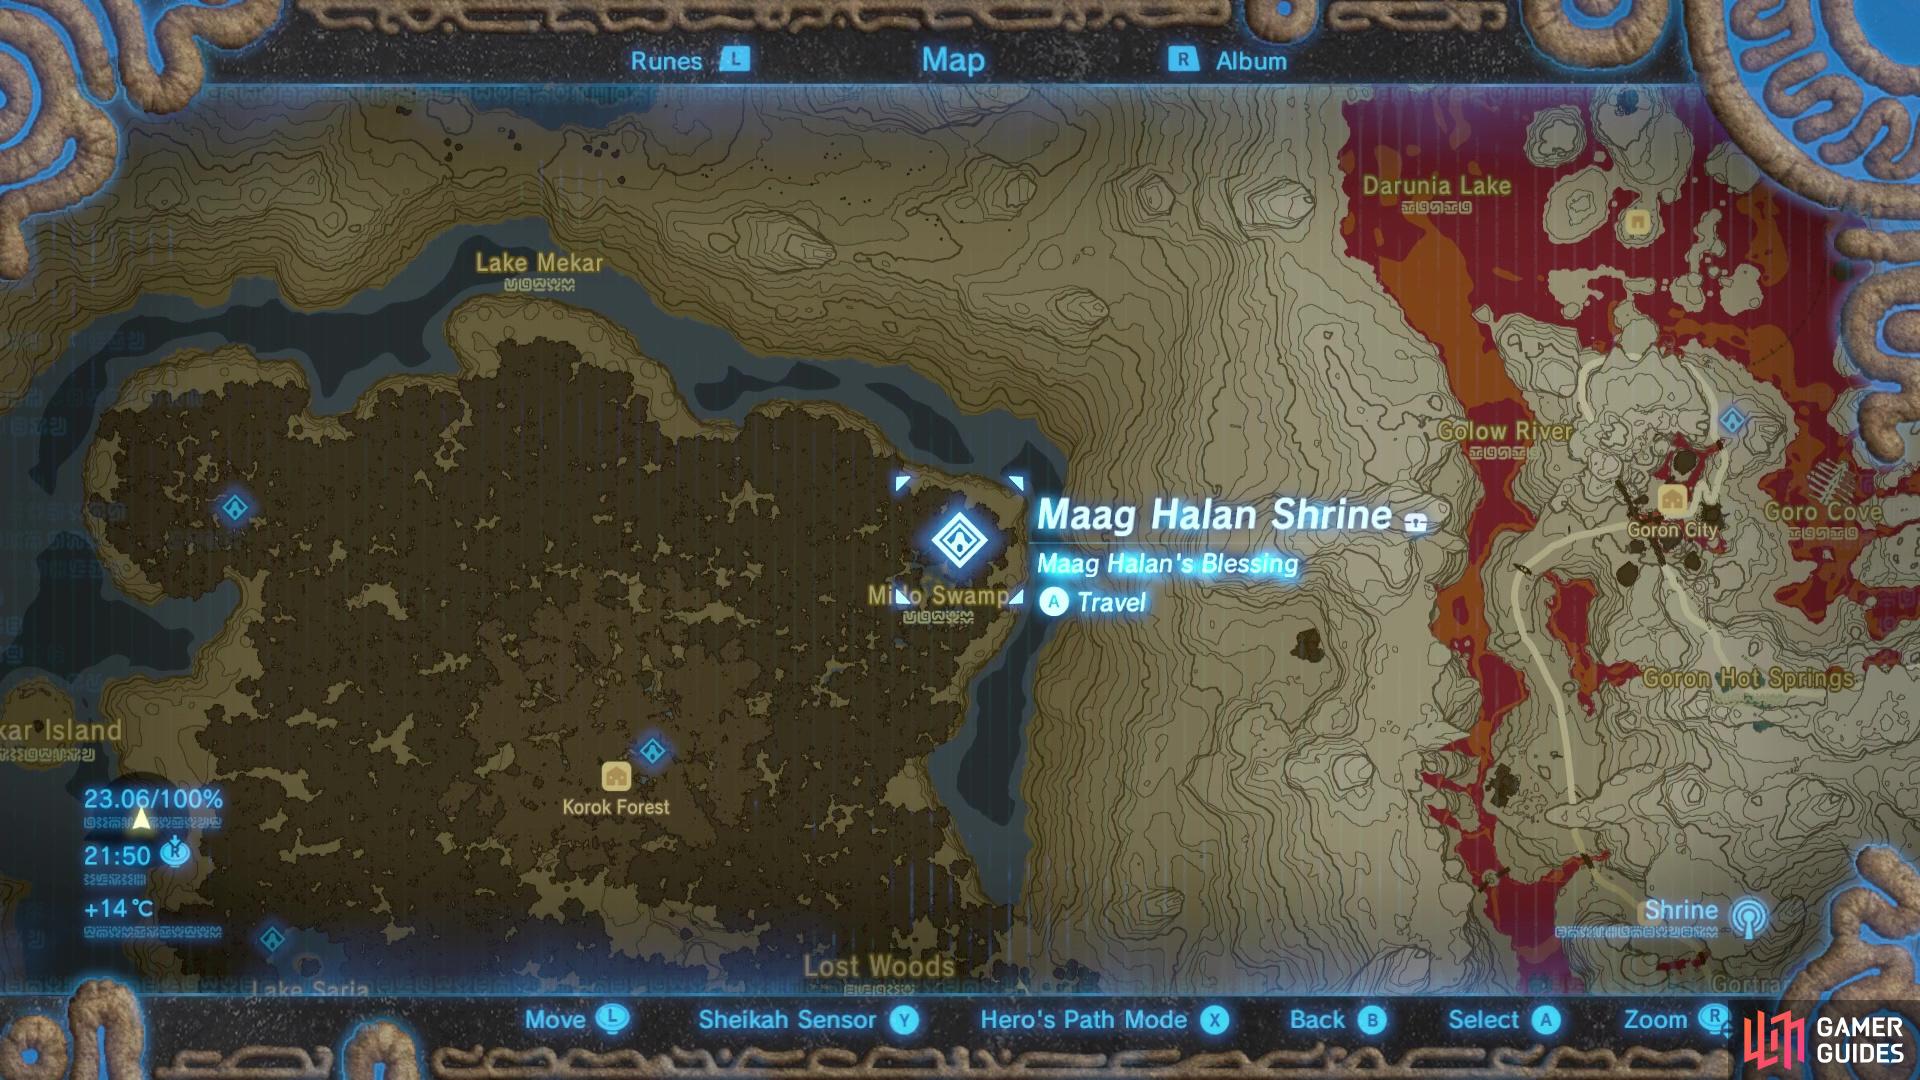 Maag Halan is found in the northeast region of Great Hyrule Forest.